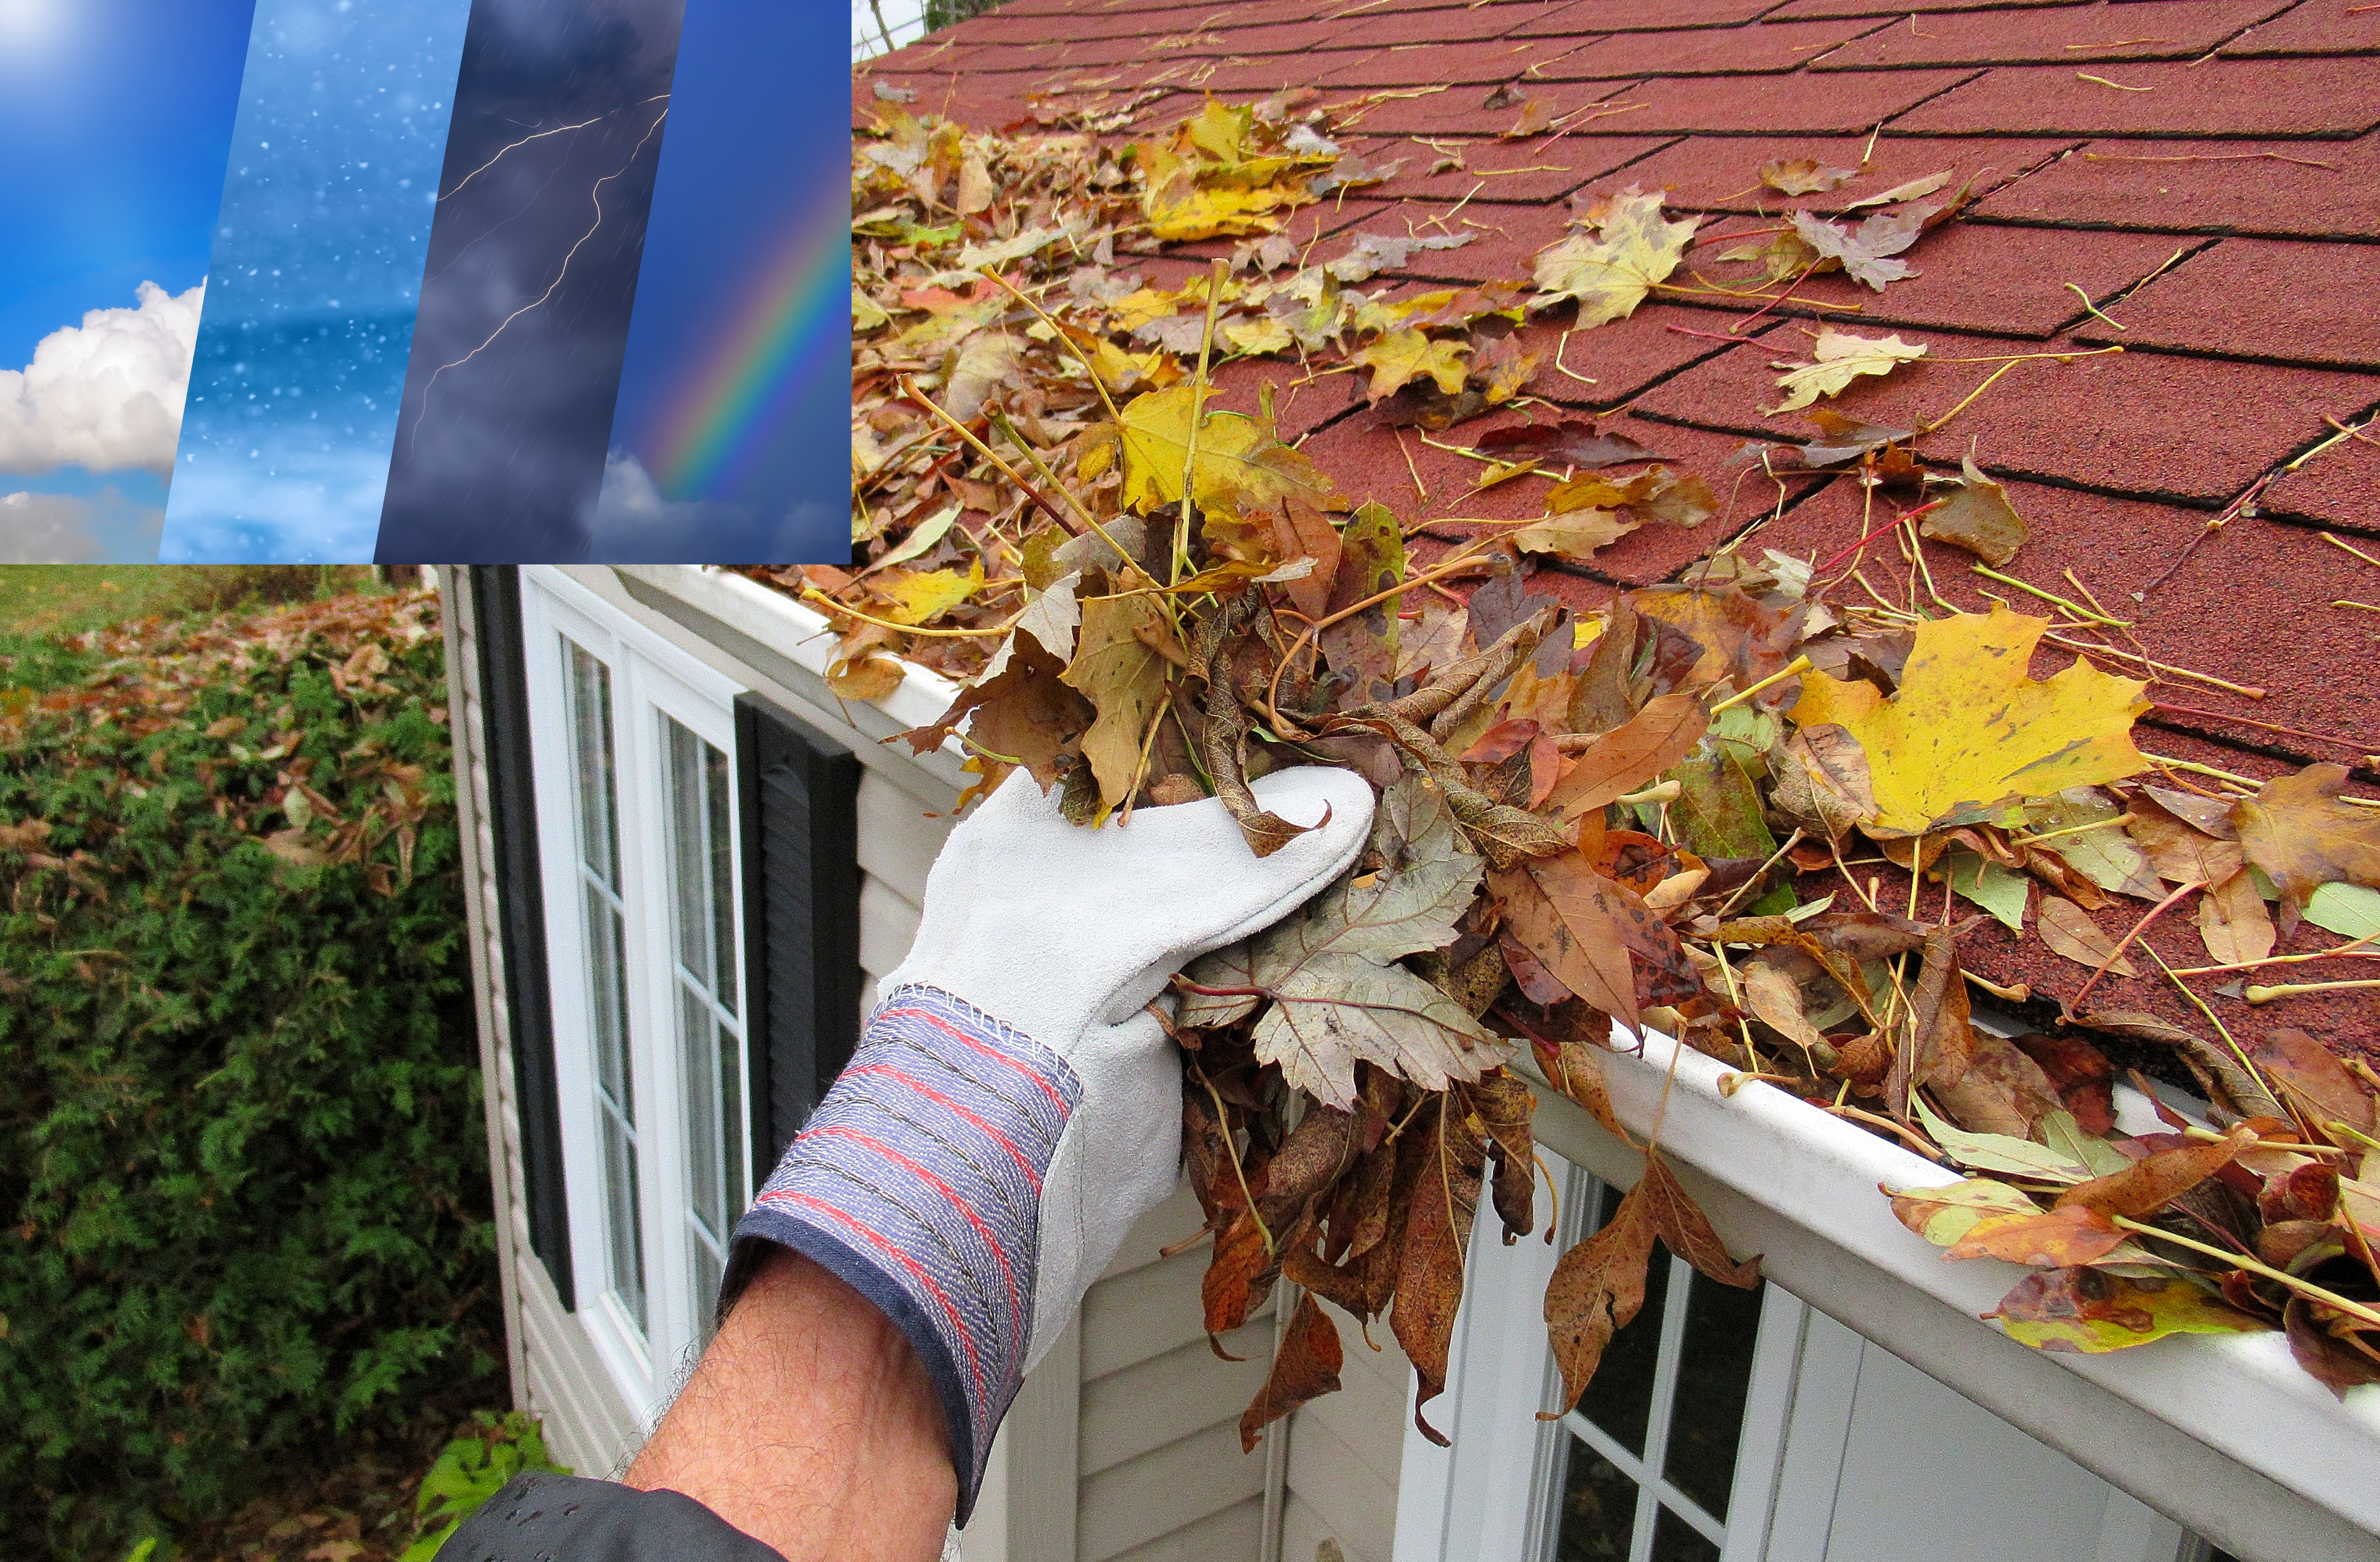 Gutters for Challenging Weather